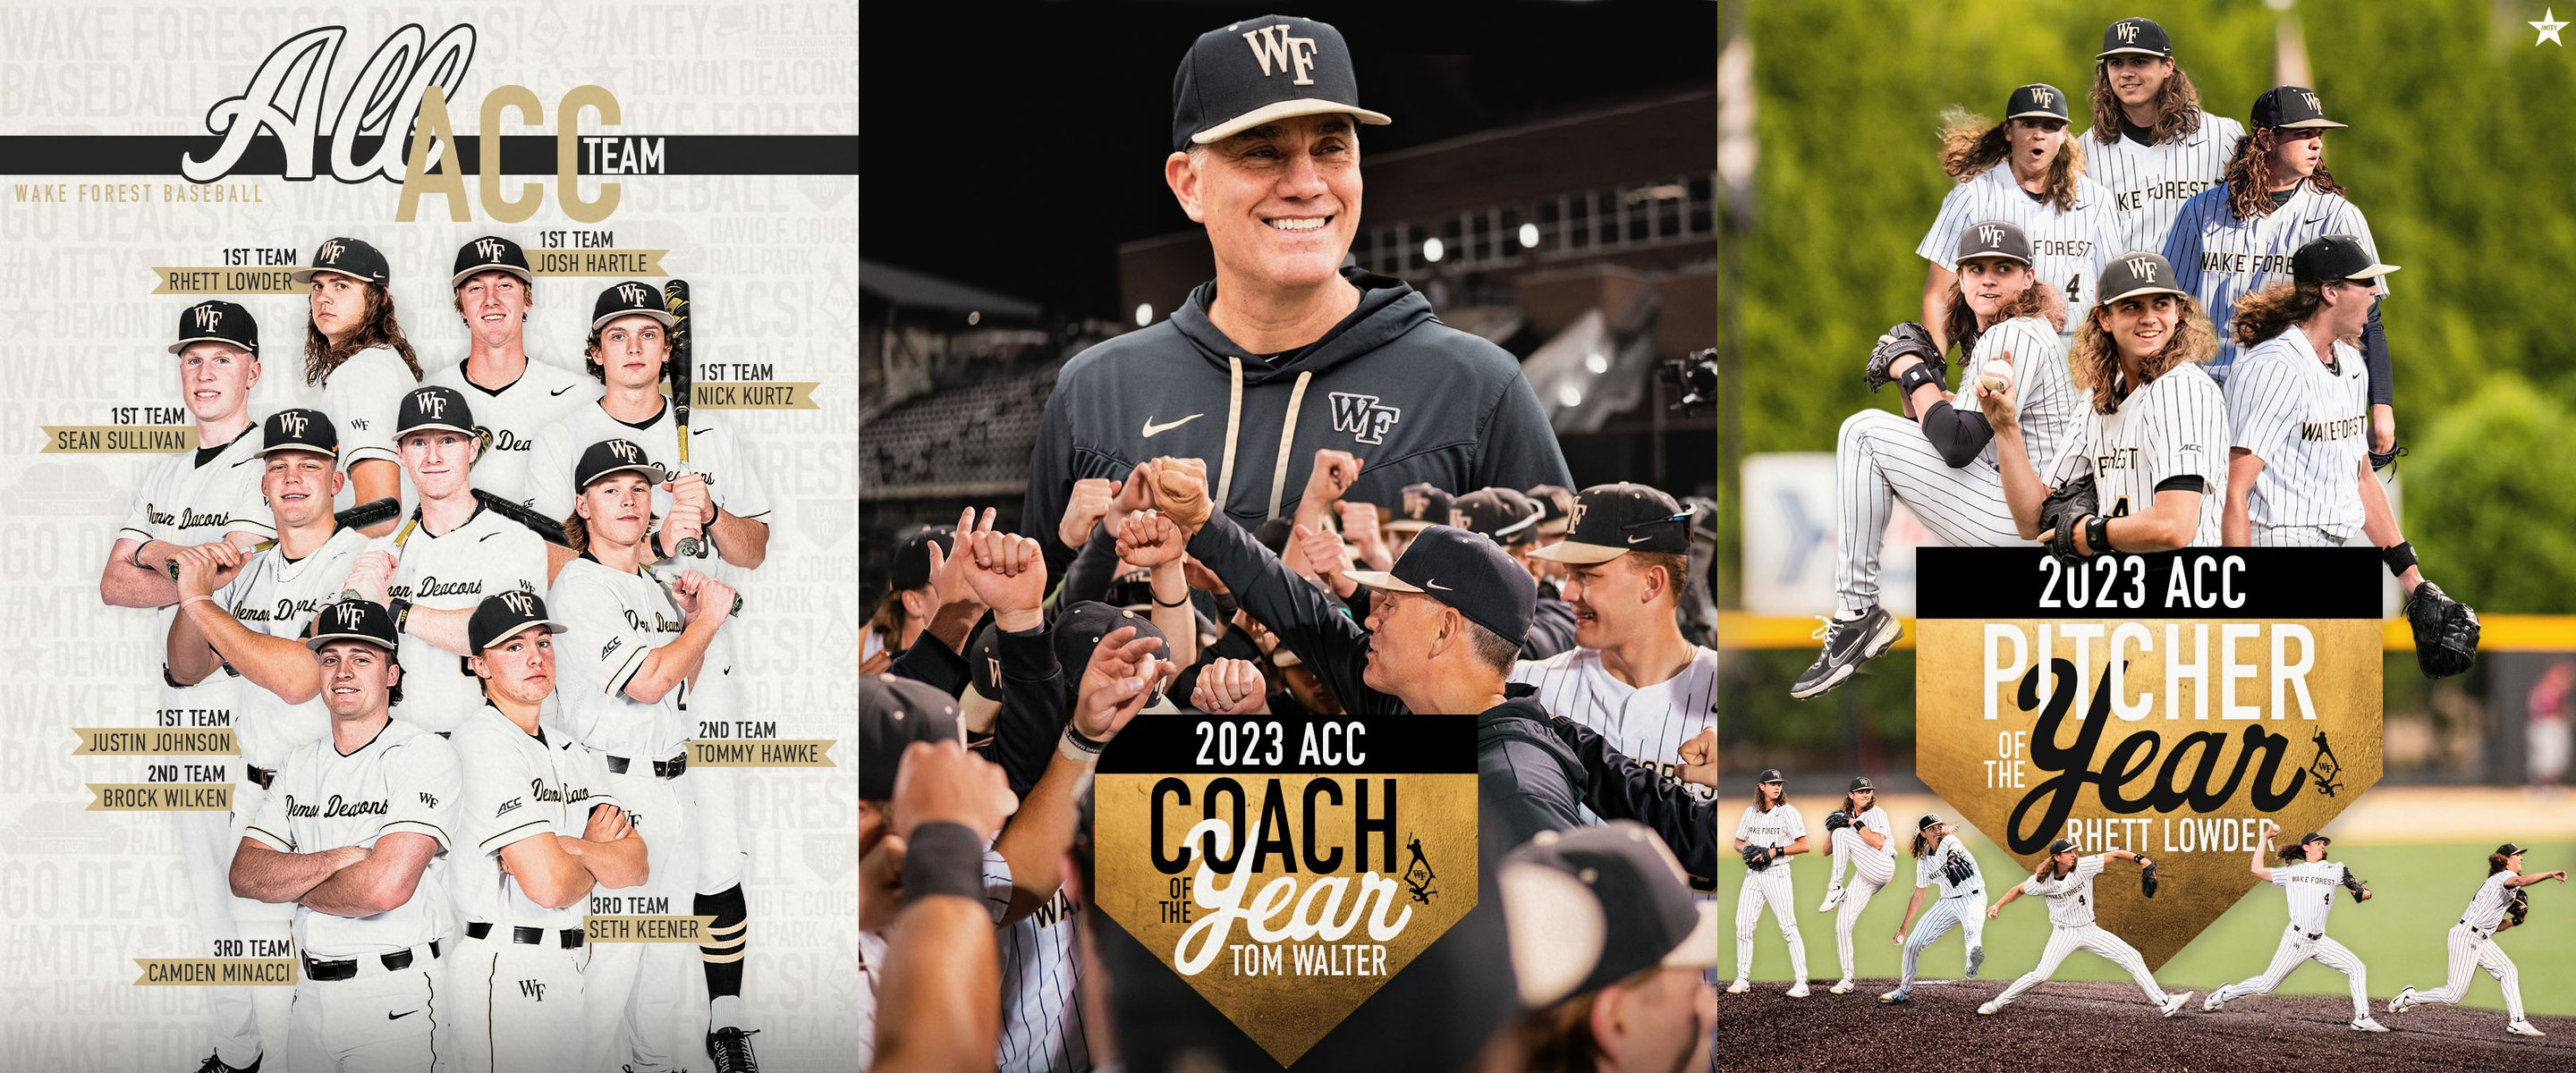 9 All ACC Players | Tom Walter Coach of the Year | 2023 ACC Pitcher of the Year